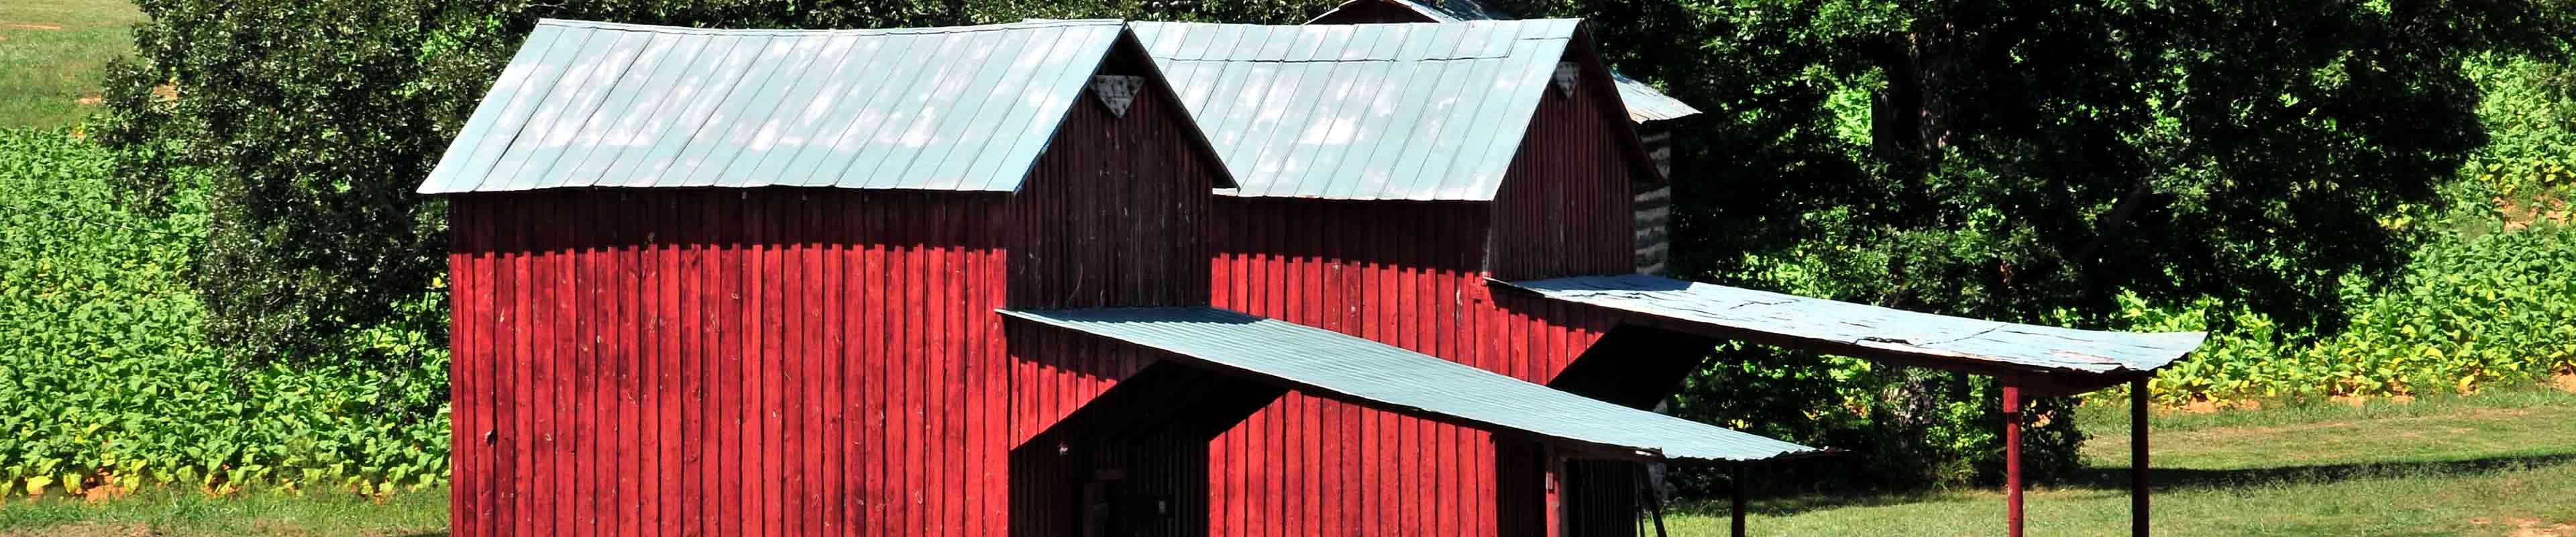 Two barns with well-maintained roofs.